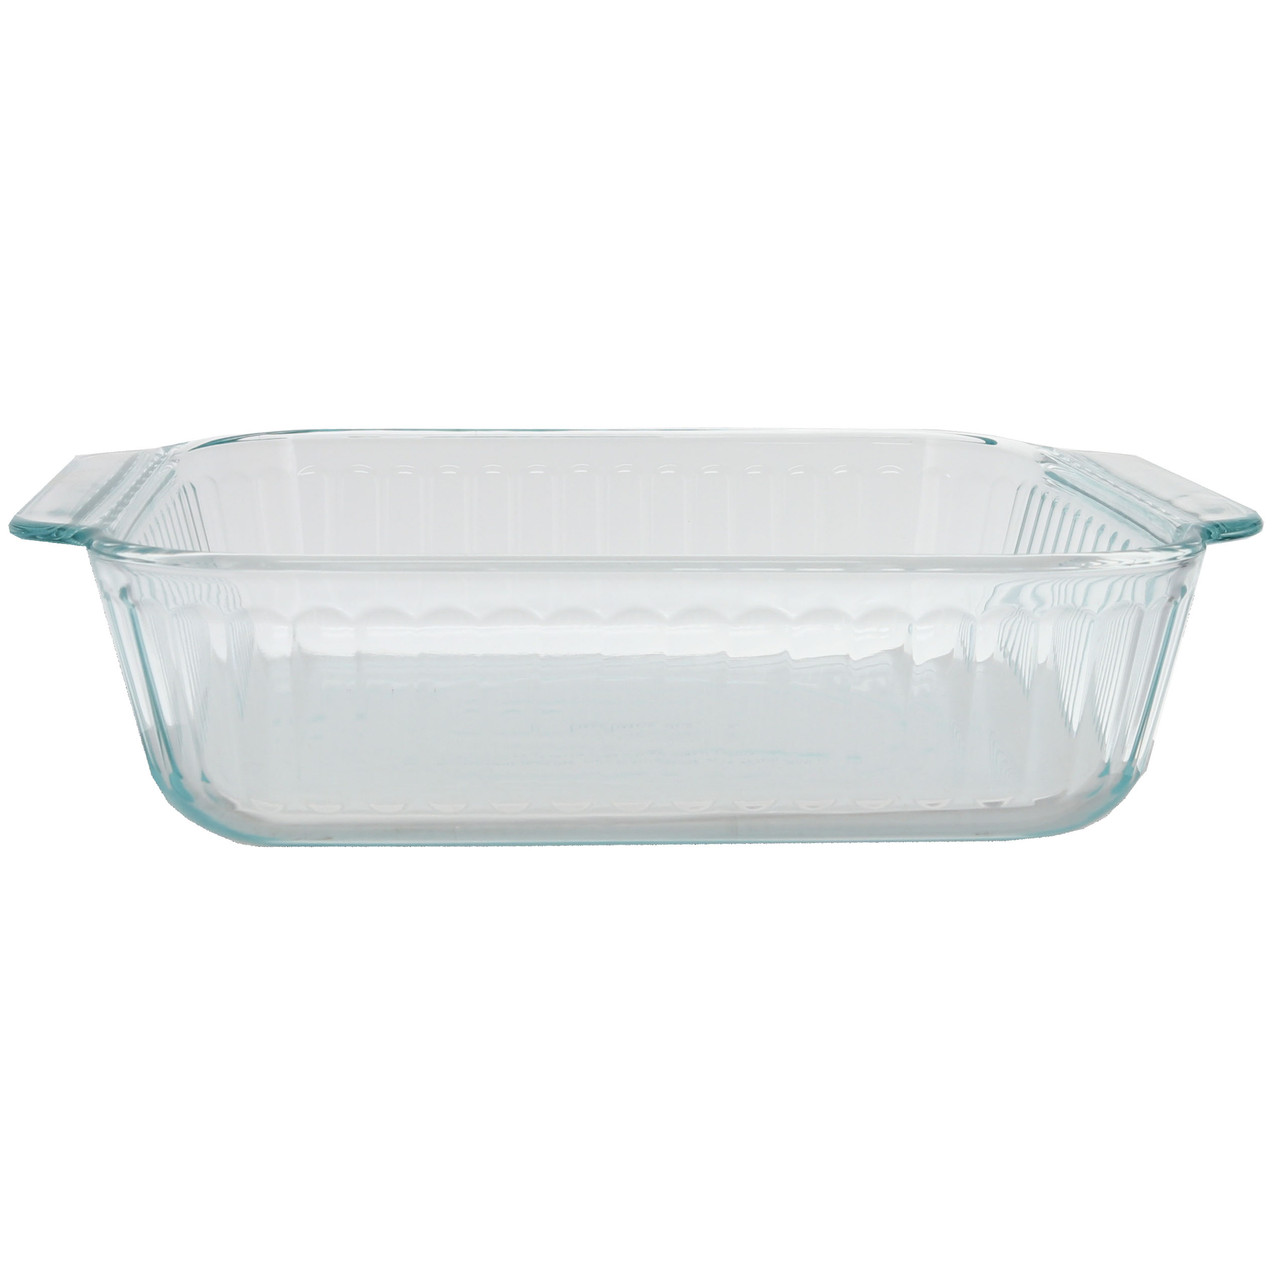 Pyrex Sculpted Baking Dish 8 Square w/ Red Lid